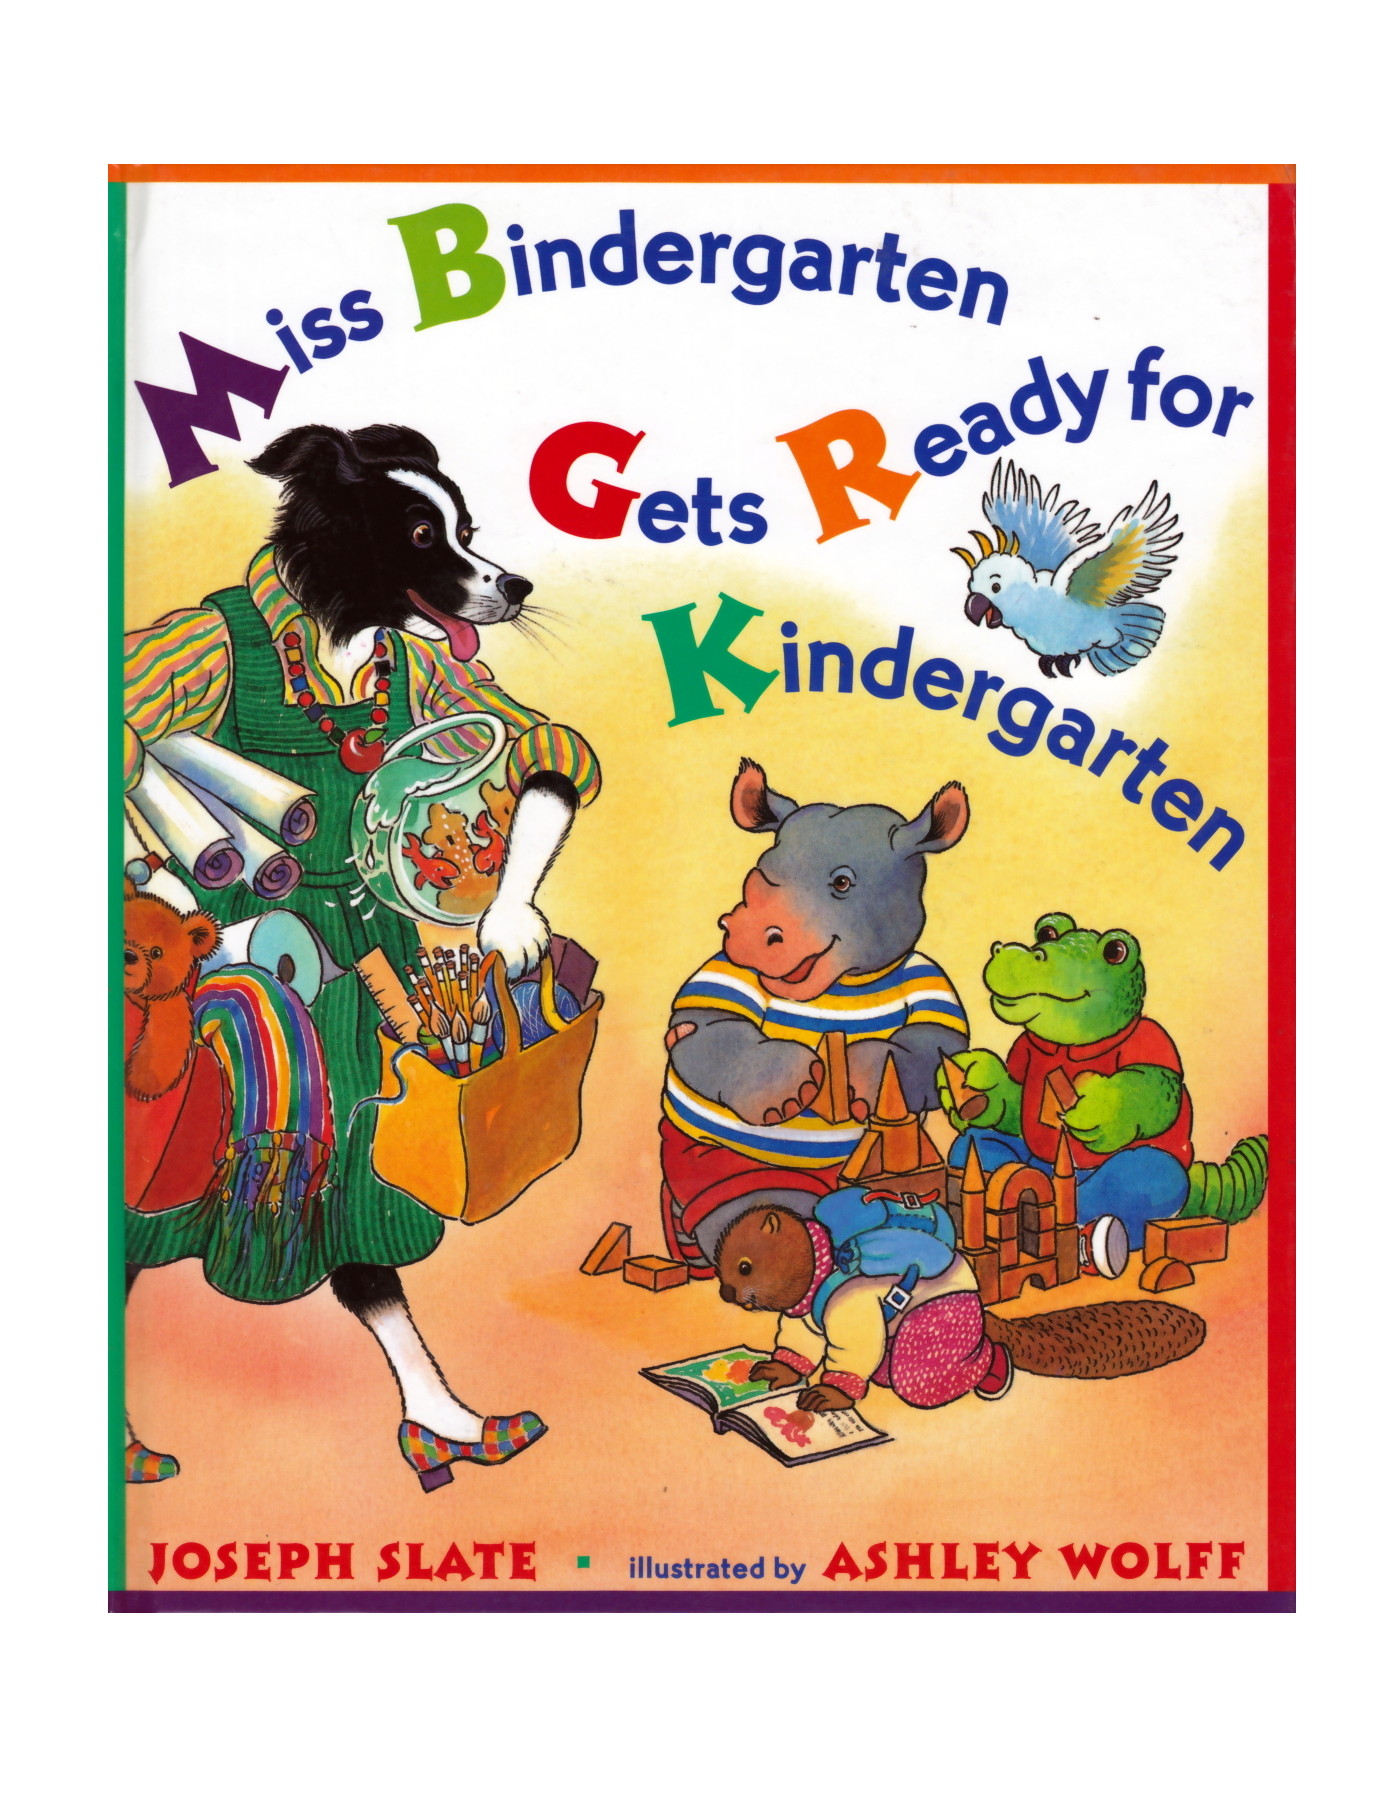  from the Summary: It's the first day of kindergarten and Miss Bindergarten is hard at work getting the classroom ready for her twenty-six new students. Meanwhile, Adam Krupp wakes up, Brenda Heath brushes her teeth, and Christopher Beaker finds his 